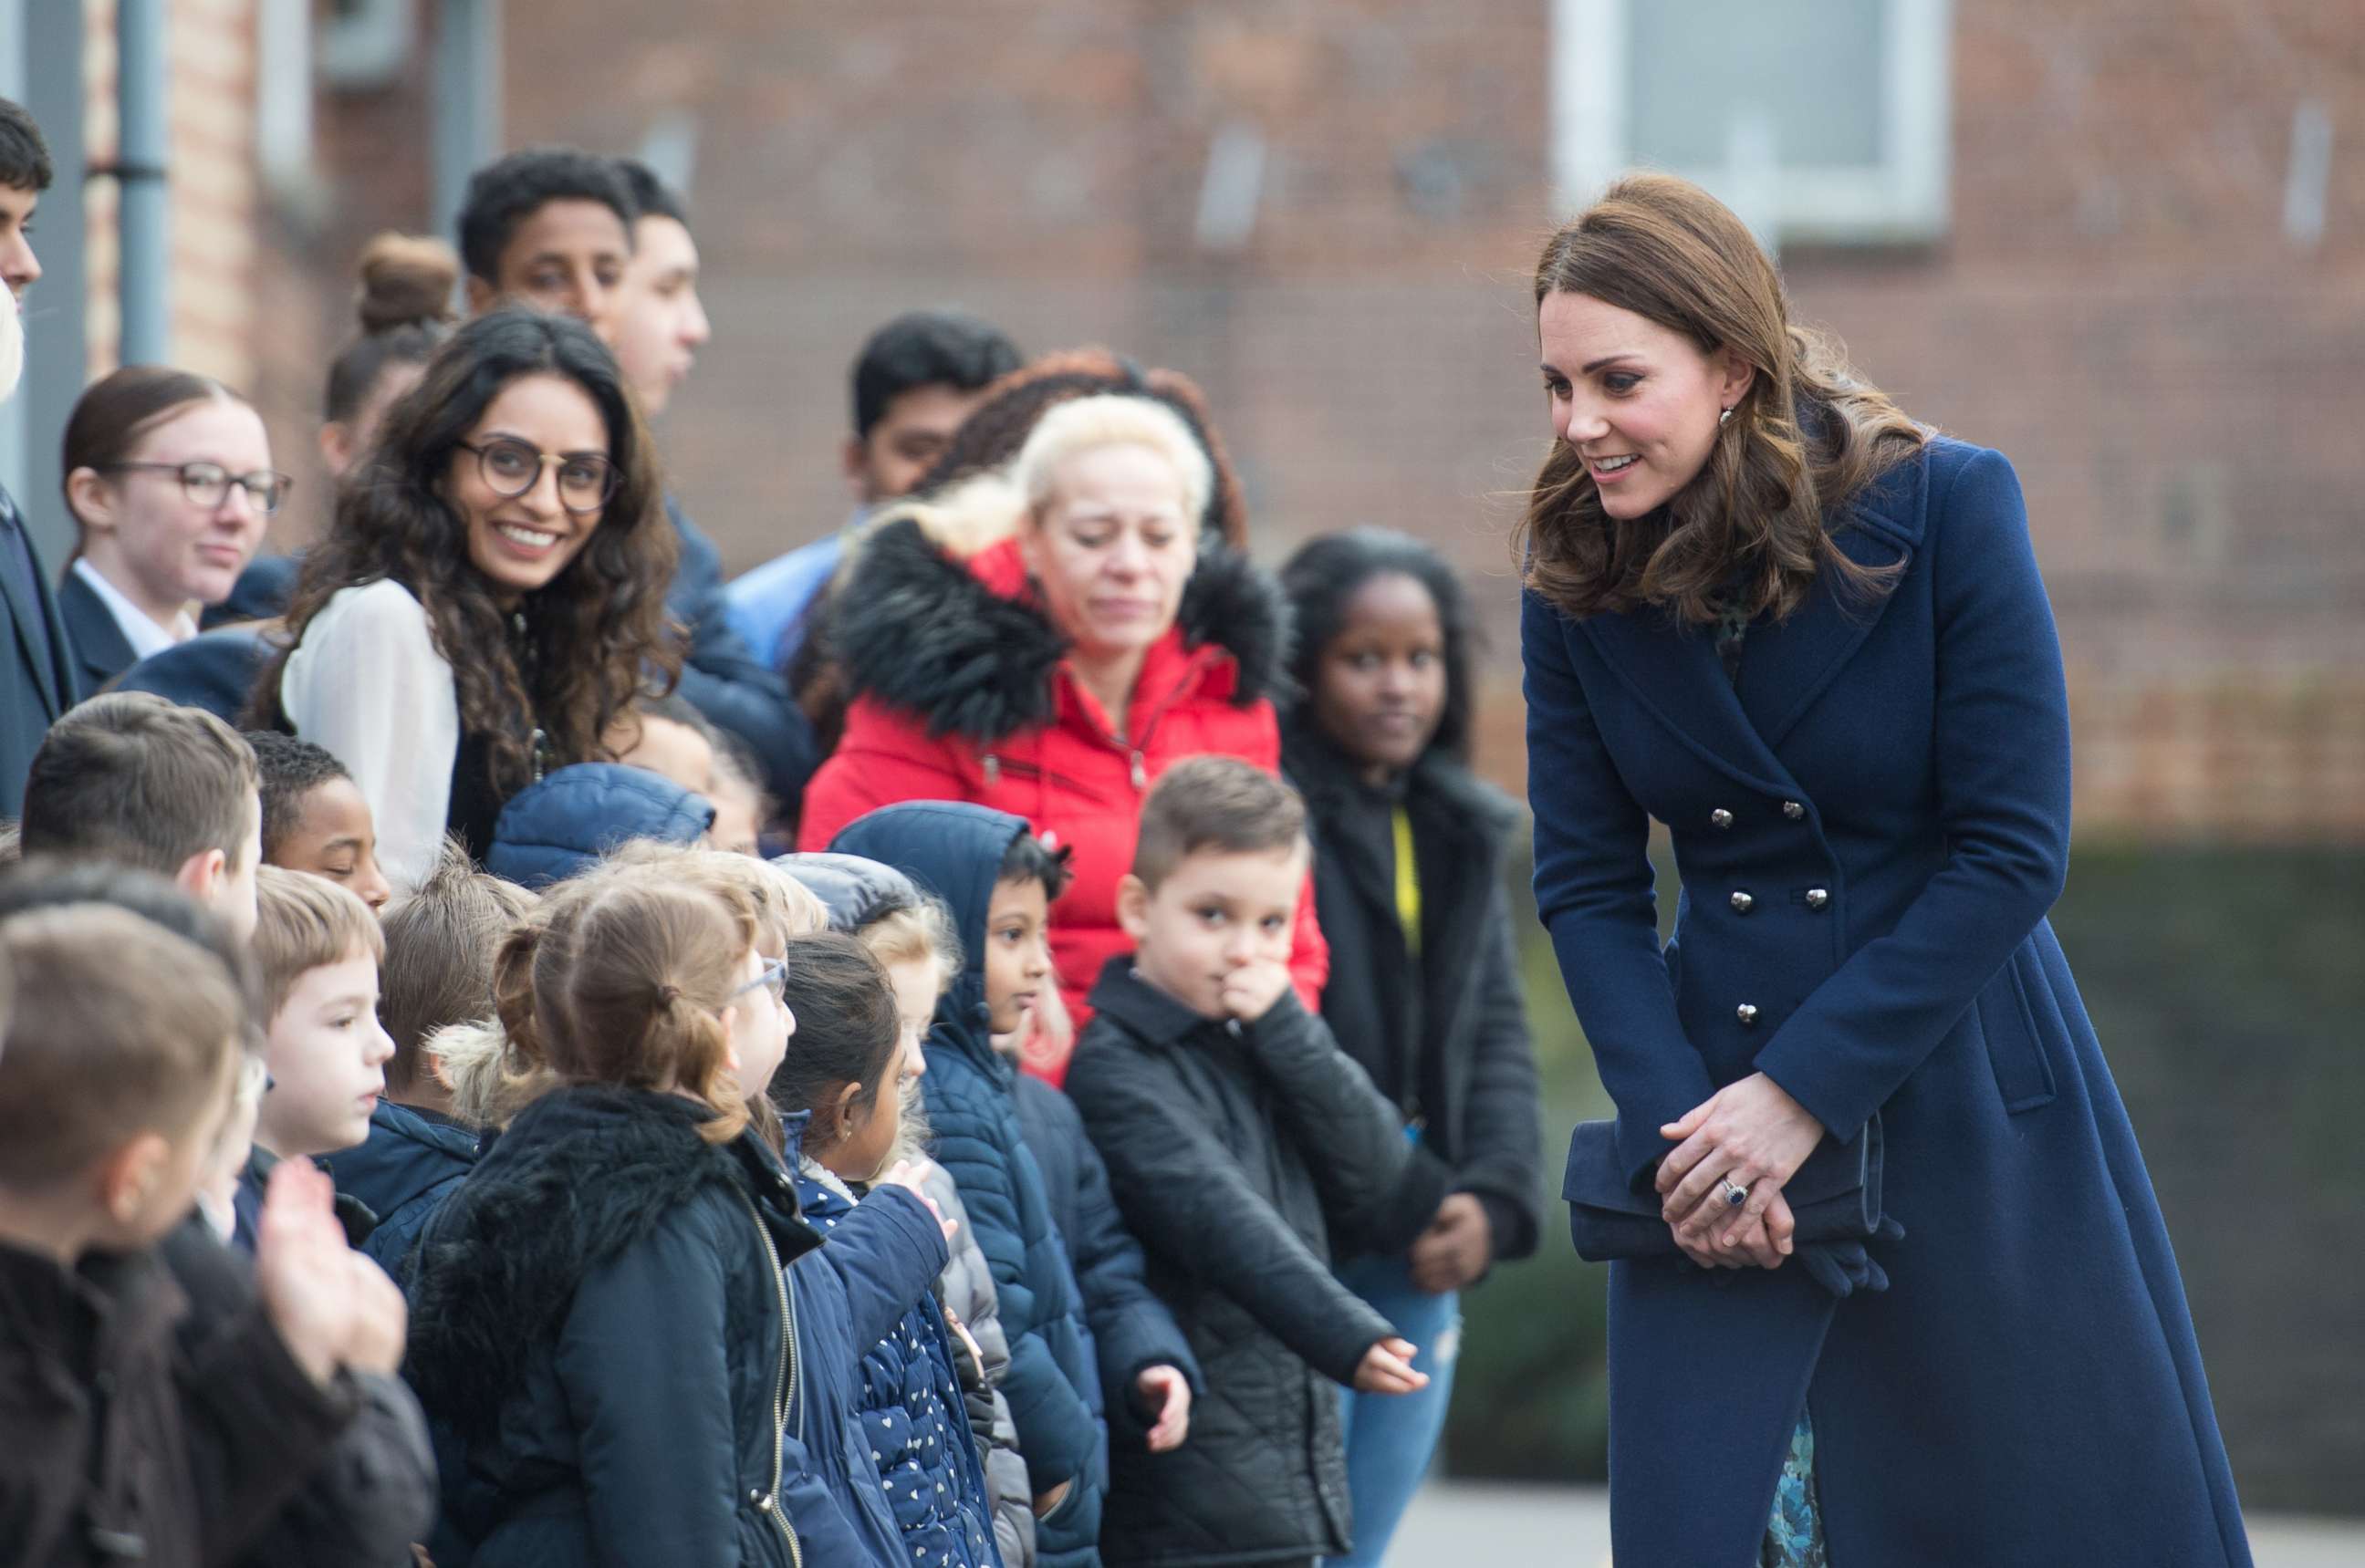 PHOTO: The Duchess of Cambridge, Kate Middleton, visits the Reach Academy in Feltham, London, Jan. 10, 2018. 

